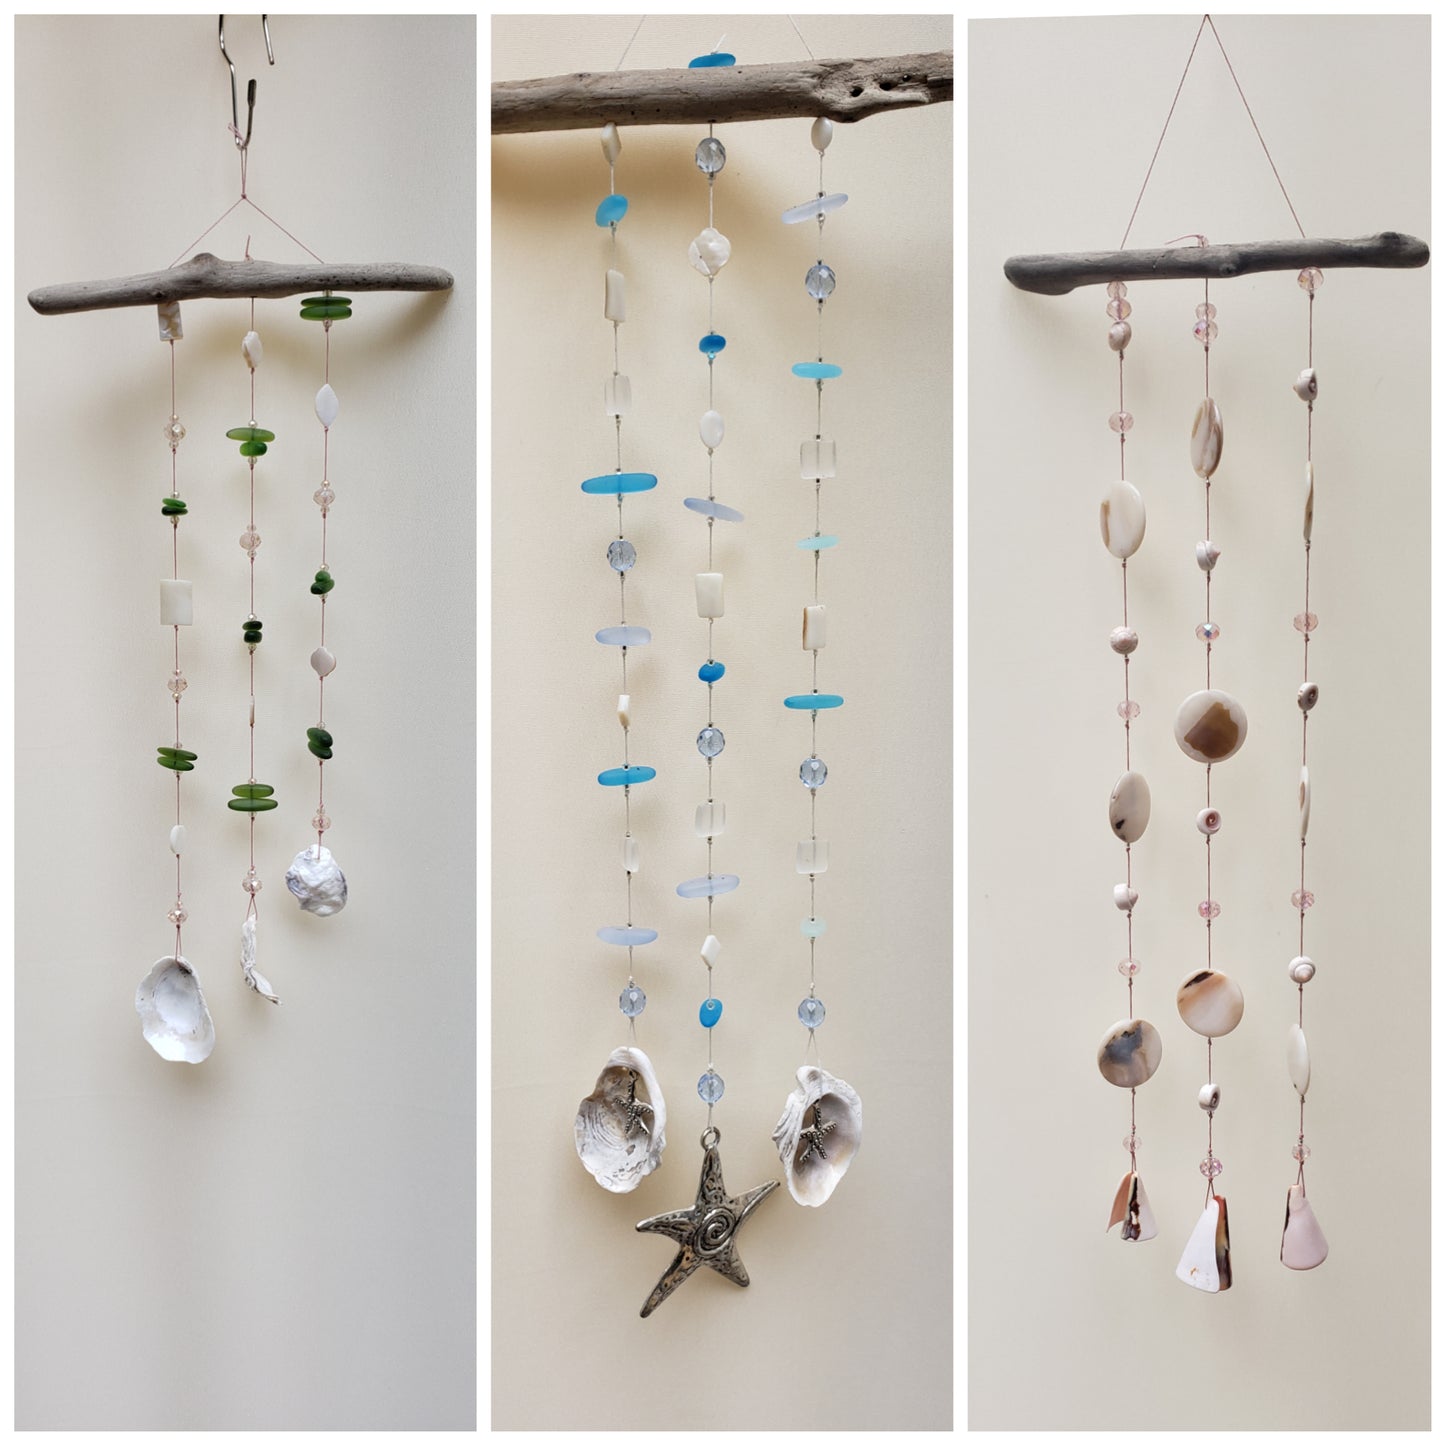 Driftwood, Shell and Bead Windchime or Suncatcher at Revival PNW on April 6th at 11 AM